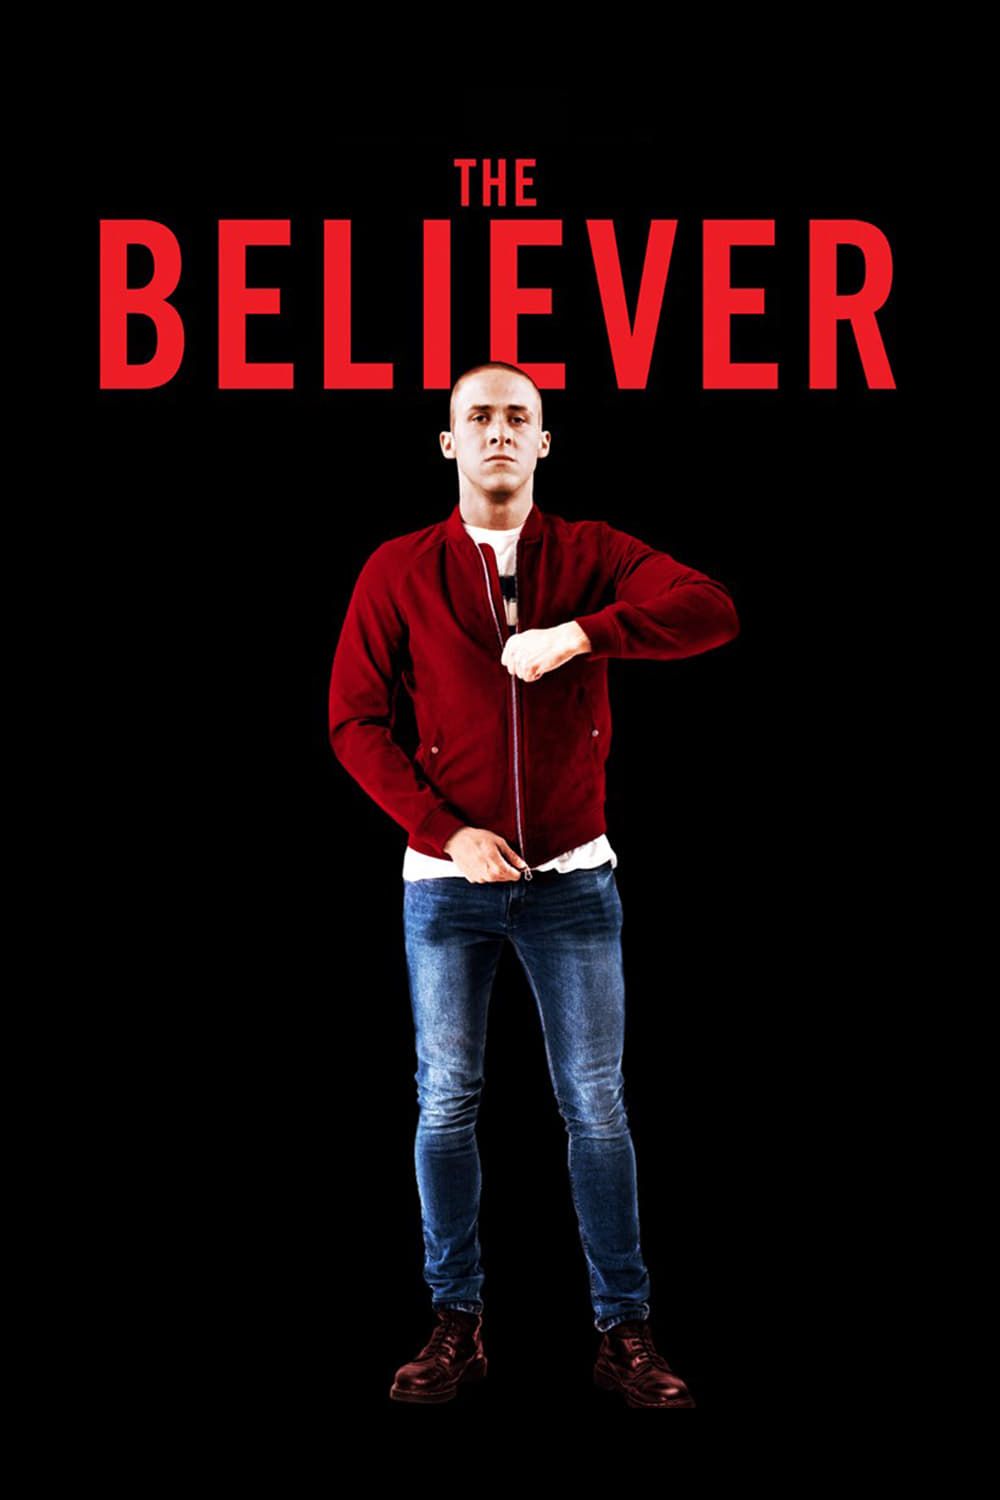 The Believer 2001 Film Poster